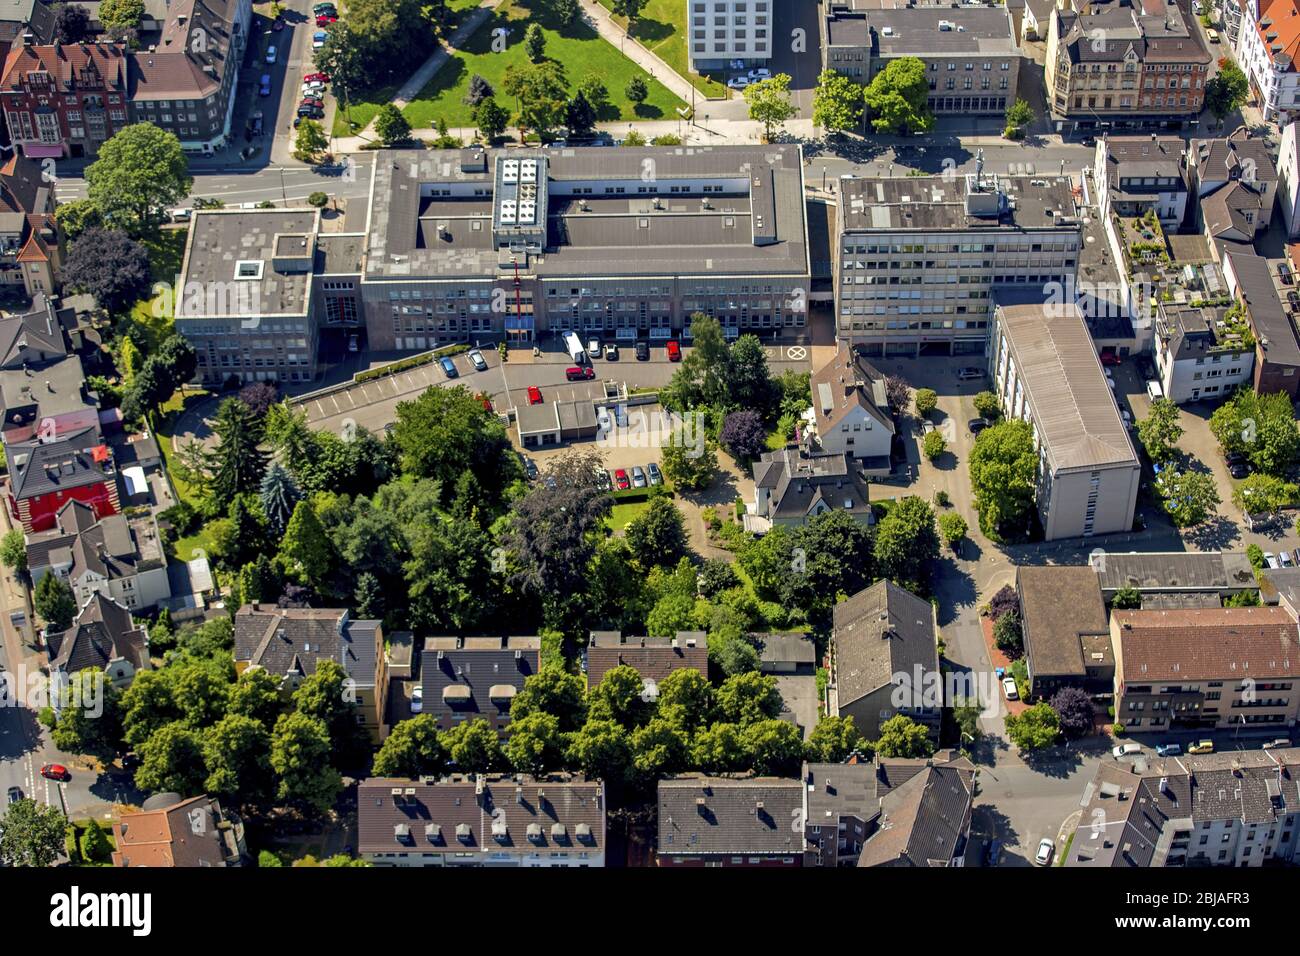 Banking administration building of the financial services company Sparkasse Witten - head office in Witten, 19.07.2016, aerial view, Germany, North Rhine-Westphalia, Ruhr Area, Witten Stock Photo